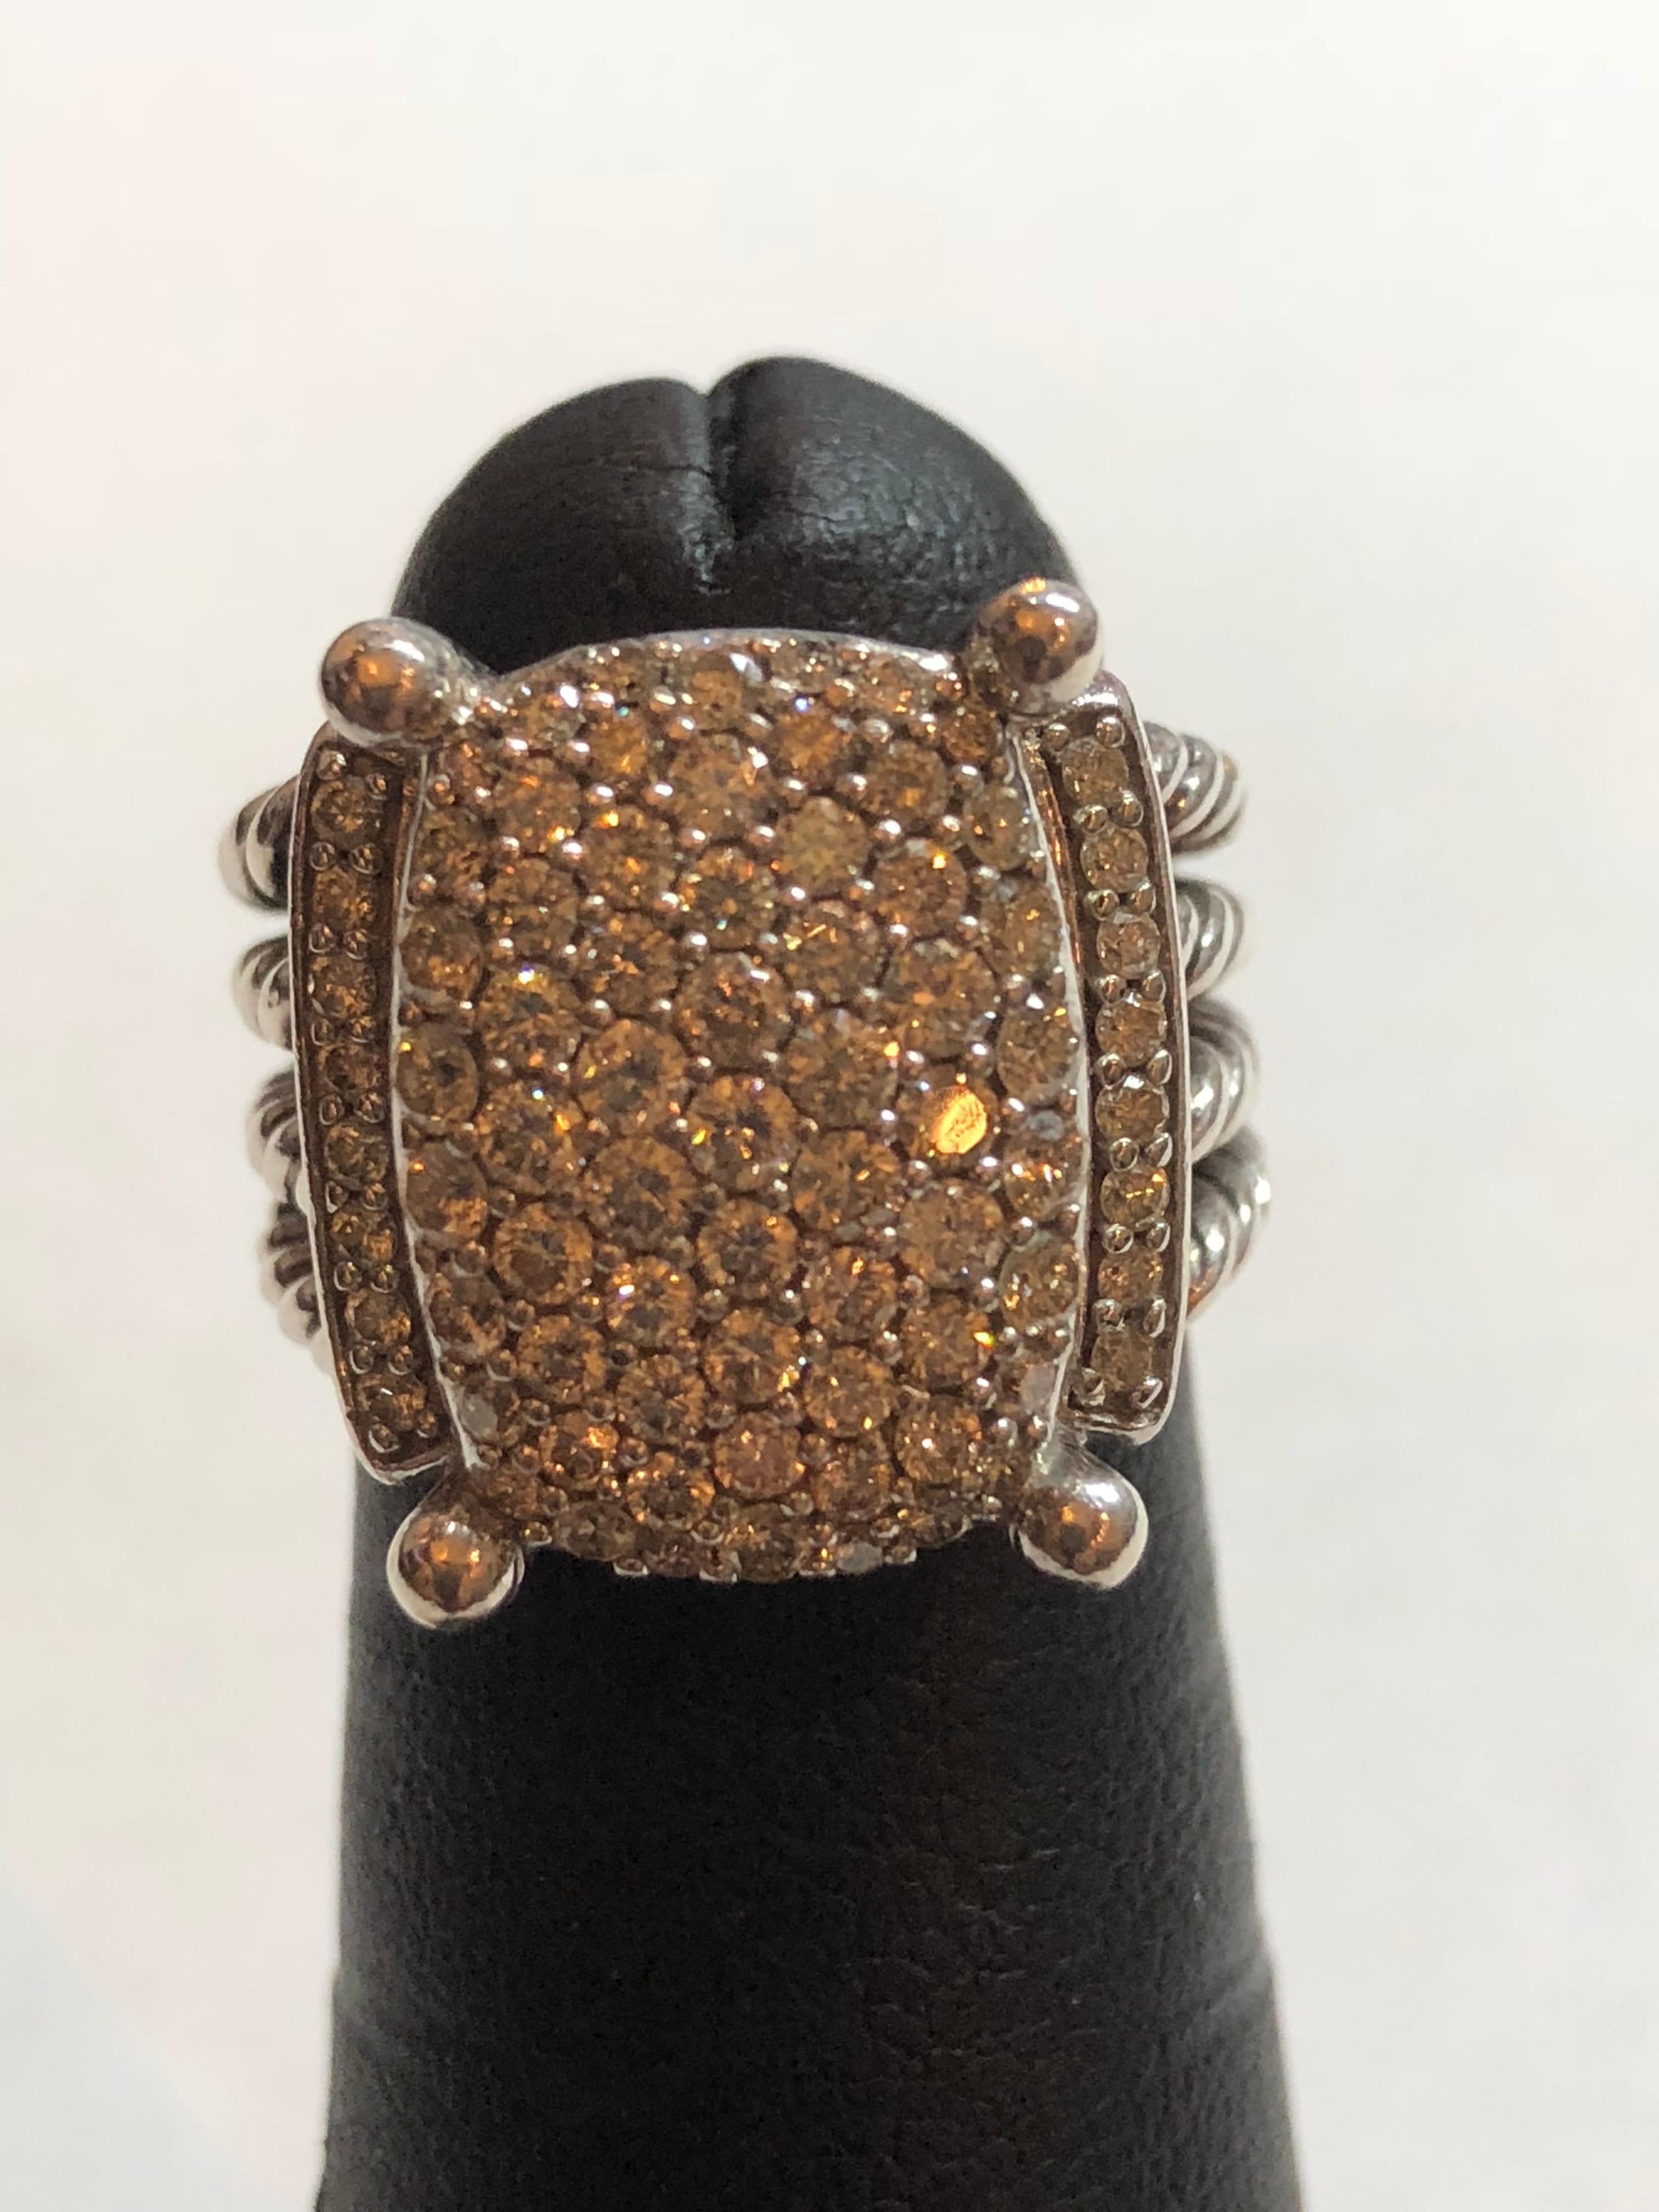 David Yurman Wheaton Ring with Diamonds
Pave Diamonds 1.12 Total carat weight
Center 16mm by 12mm
Ring 6mm wide
Diamonds are VS and I color
Sterling Silver
Size 5